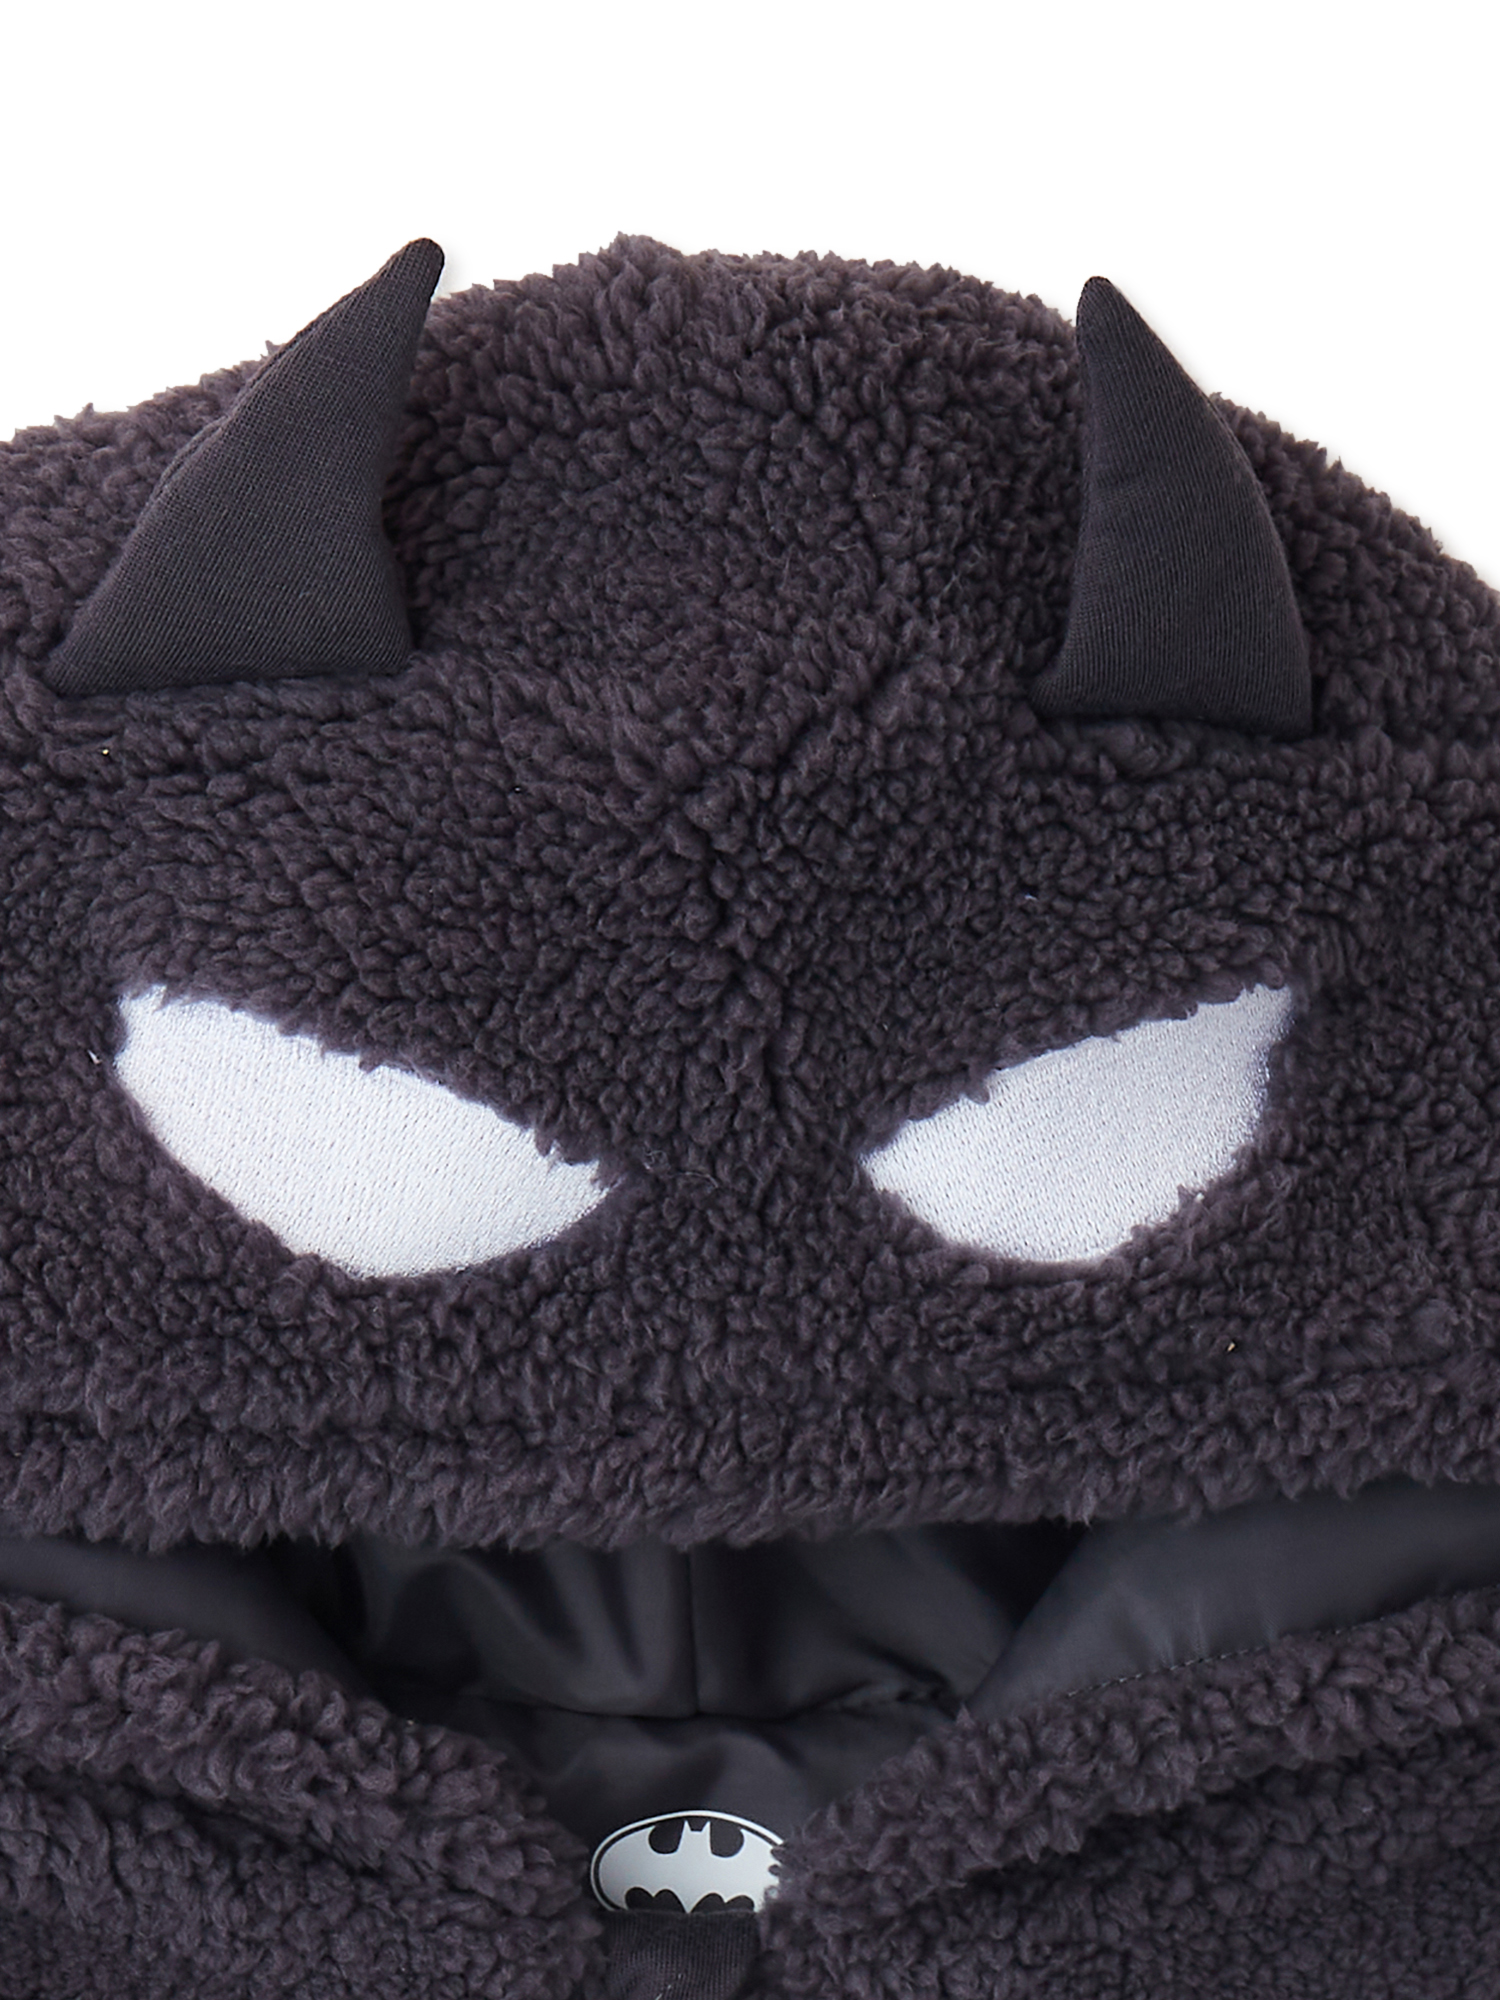 Batman Toddler Cosplay Faux Sherpa Hoodie, Sizes 12M-5T - image 2 of 6